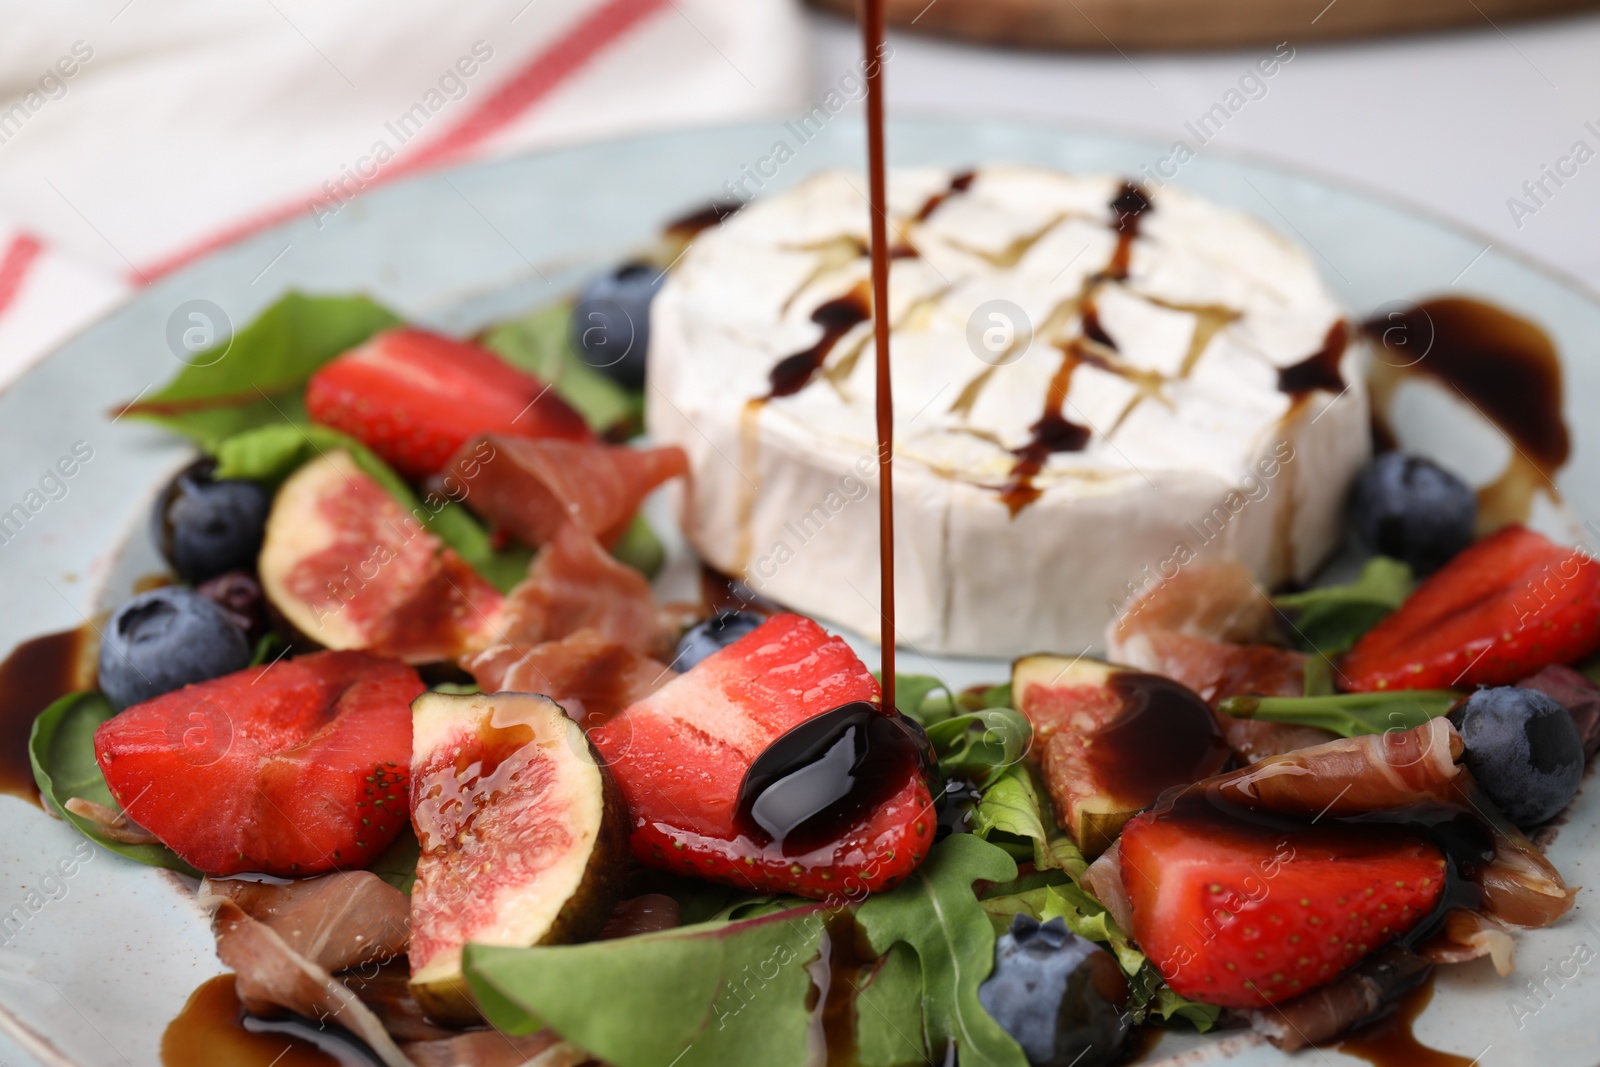 Photo of Pouring balsamic vinegar onto fresh salad with brie cheese, figs and berries on plate, closeup